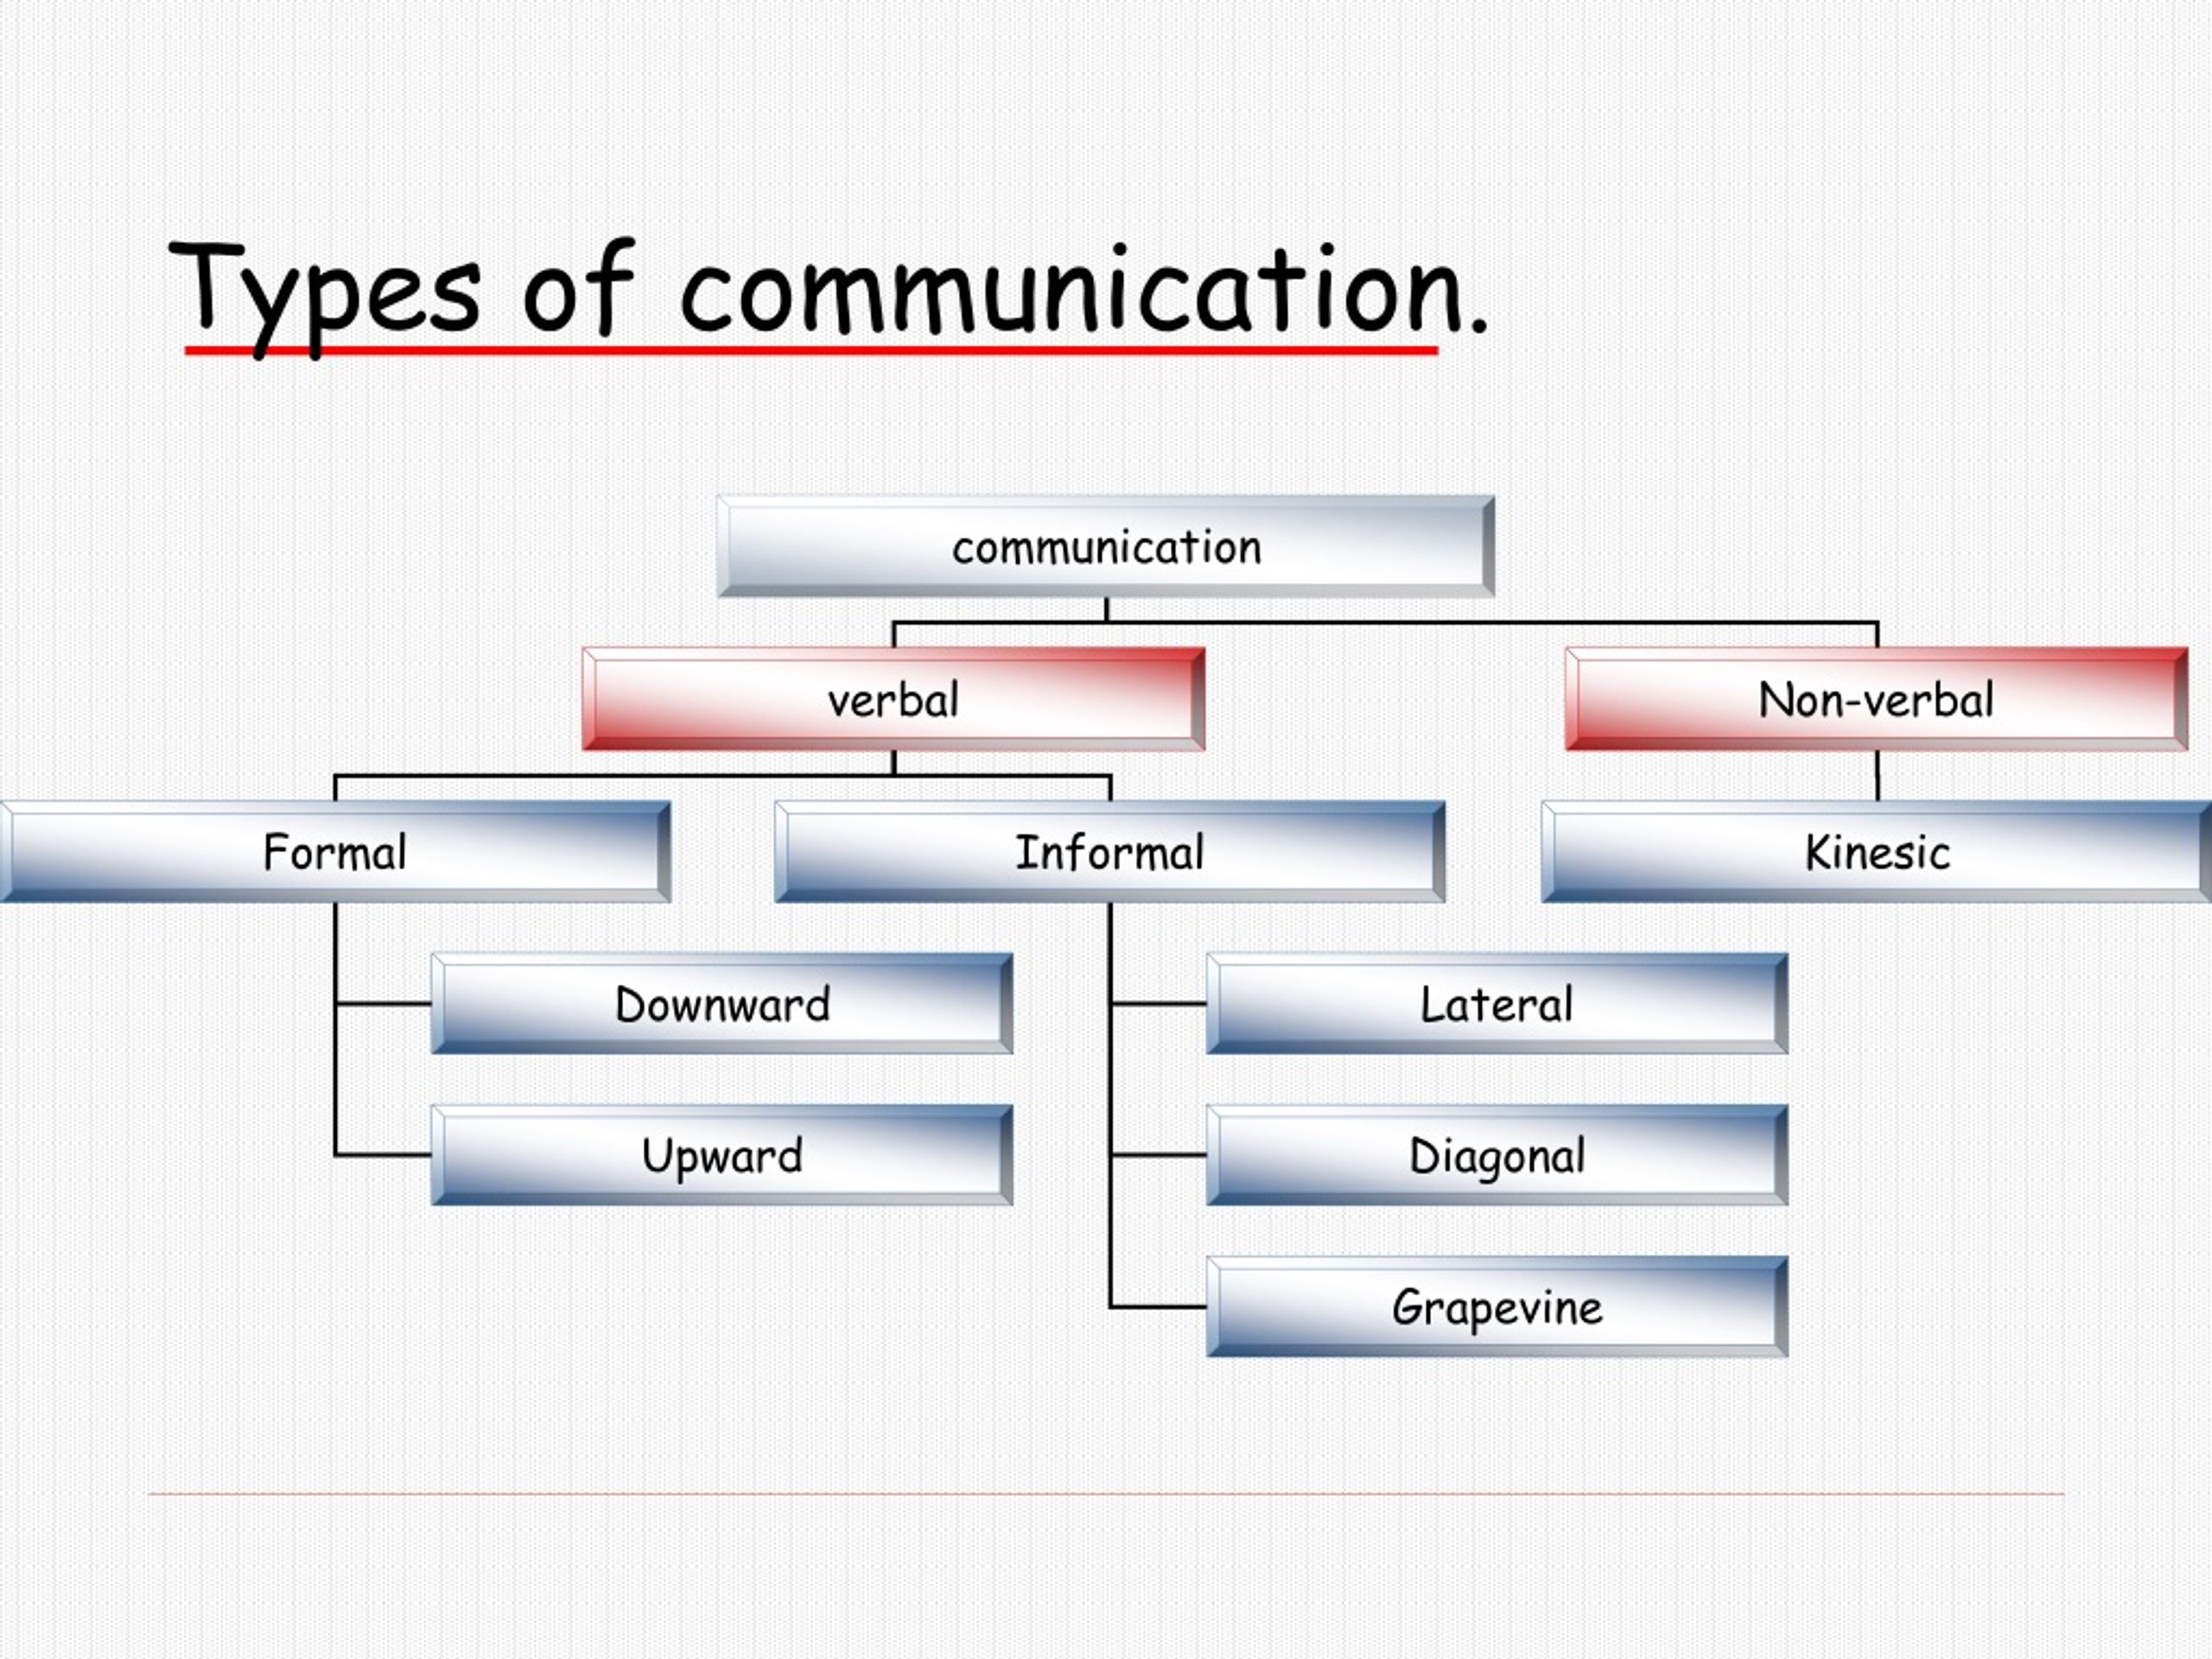 Ppt - Types Of Communication Powerpoint Presentation, Free Download 